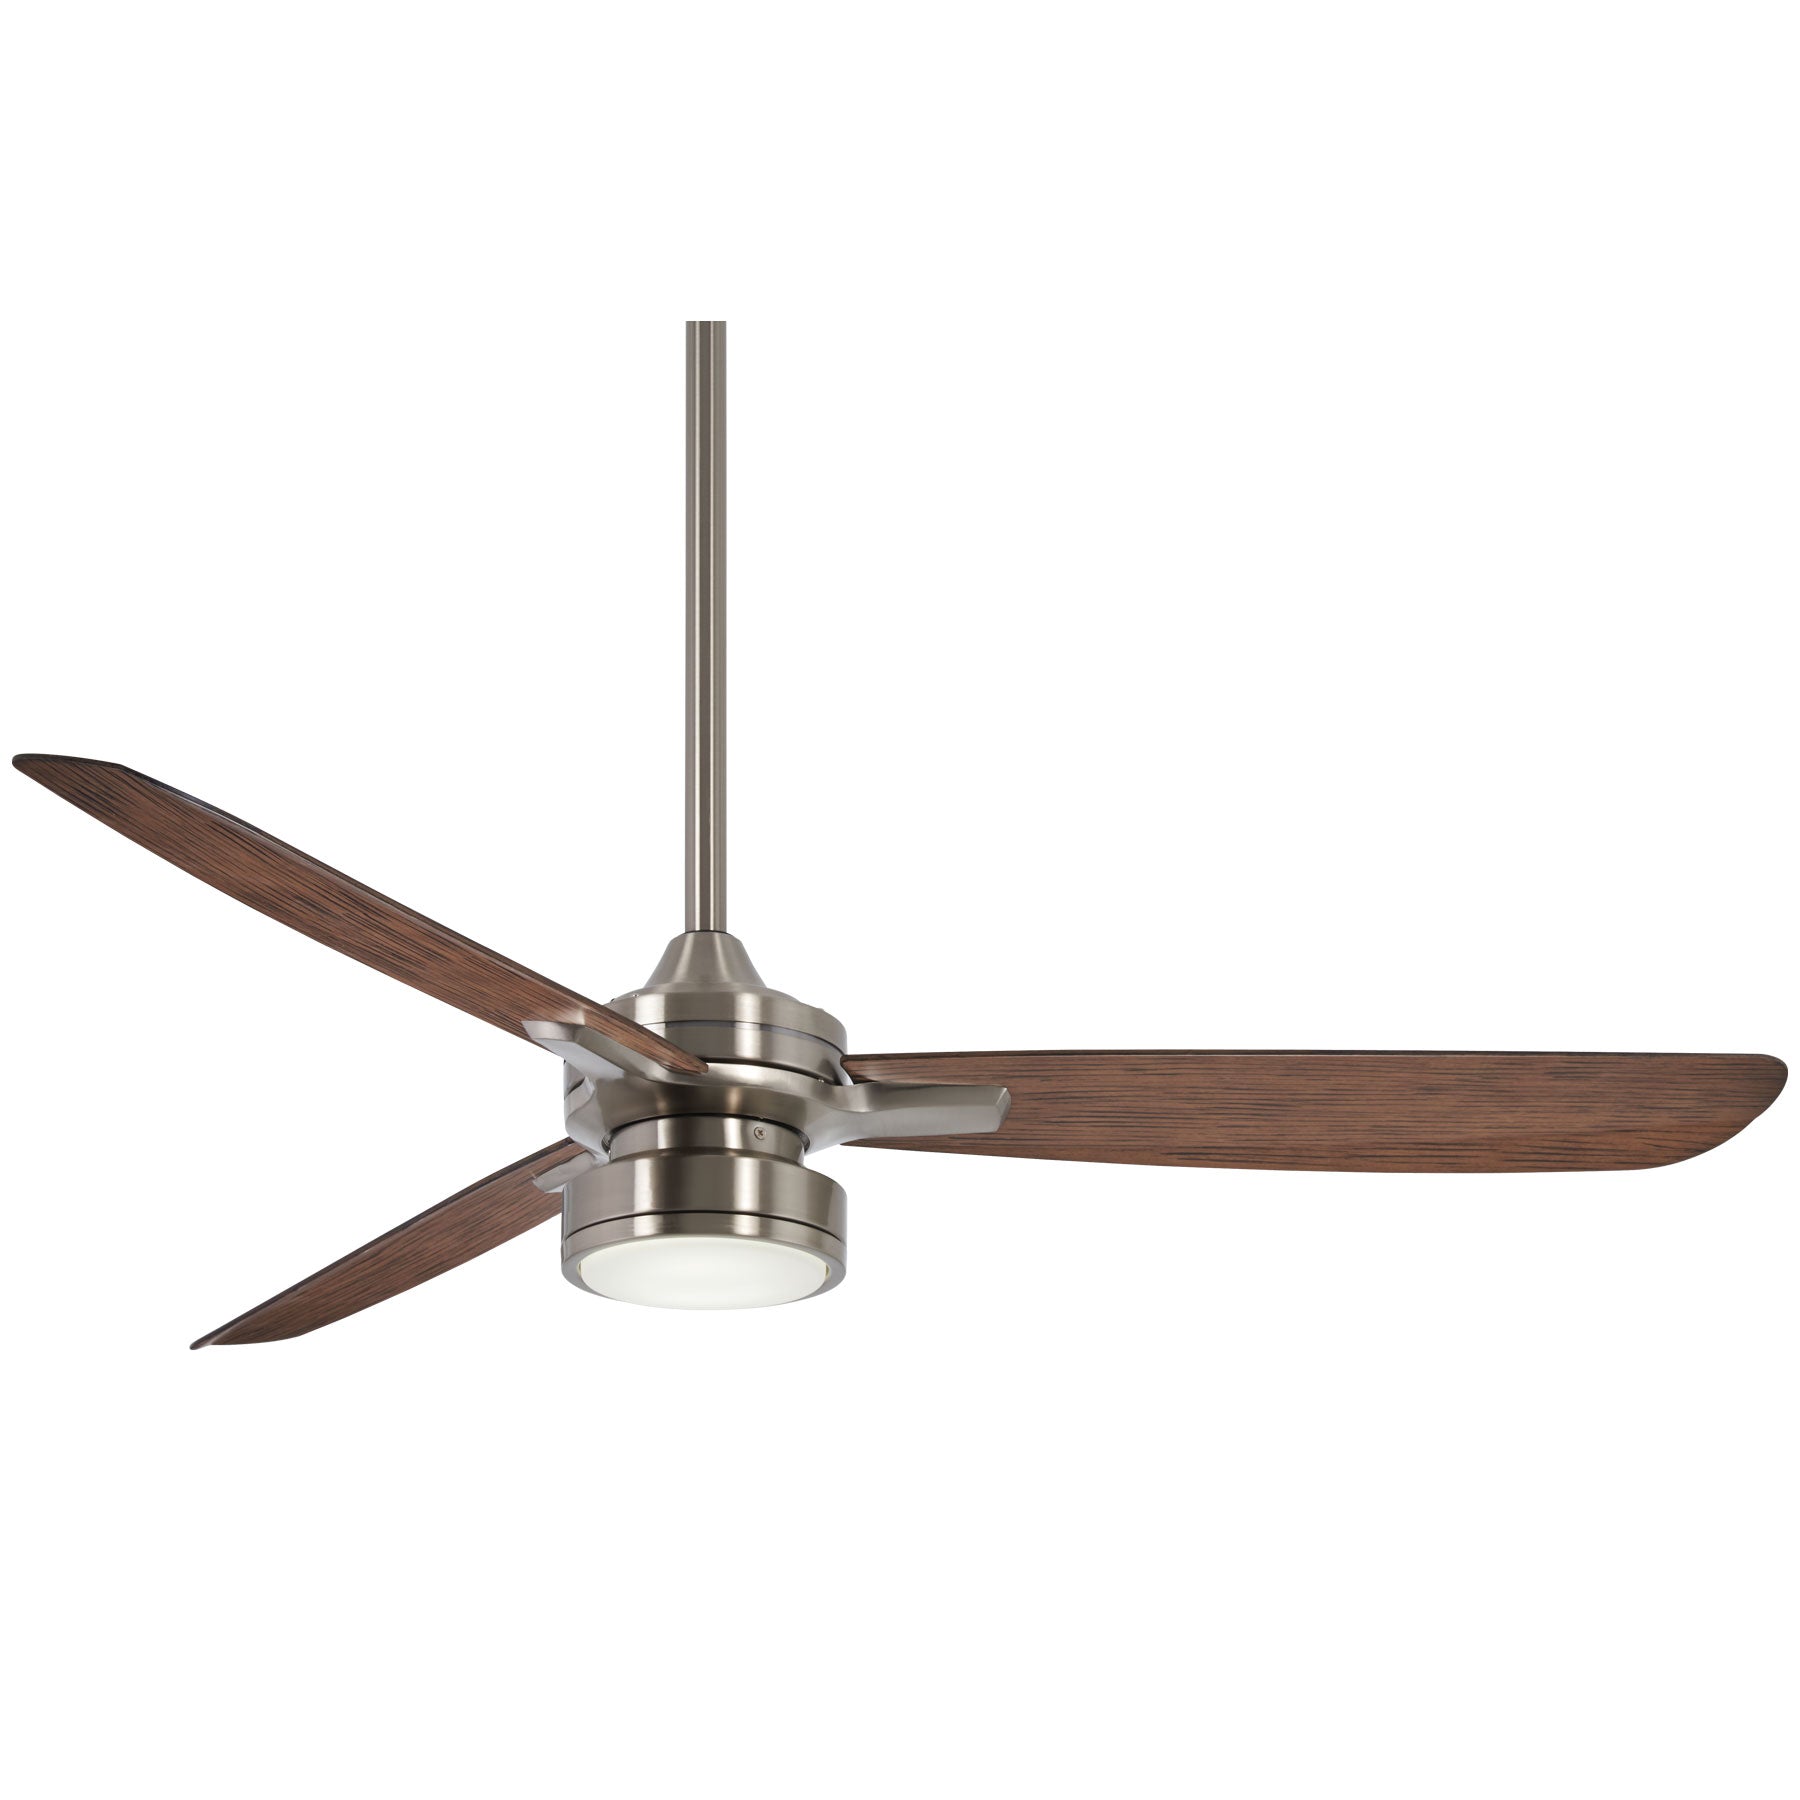 Minka Aire Rudolph 52" Ceiling Fan with Wall Control F727 Ceiling Fan Minka-Aire Brushed Nickel Finish with Medium Maple Blades  